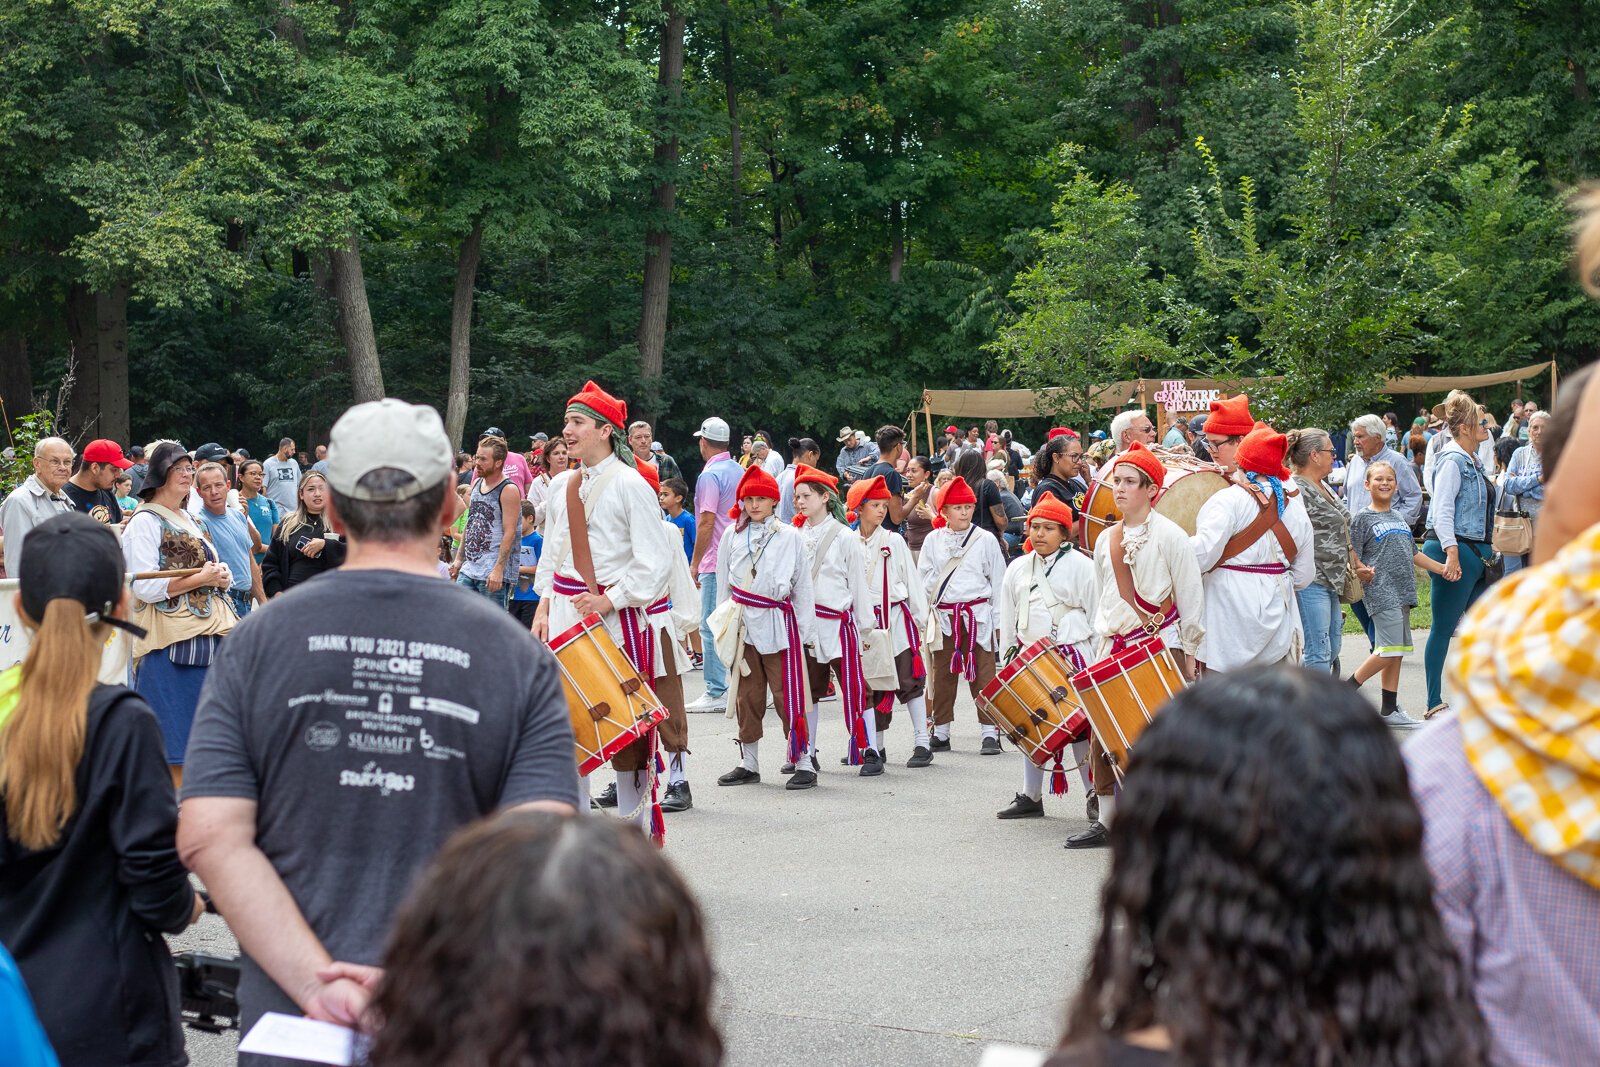 The Voyageur Ancient Fife & Drum Corps performing at the Festival.